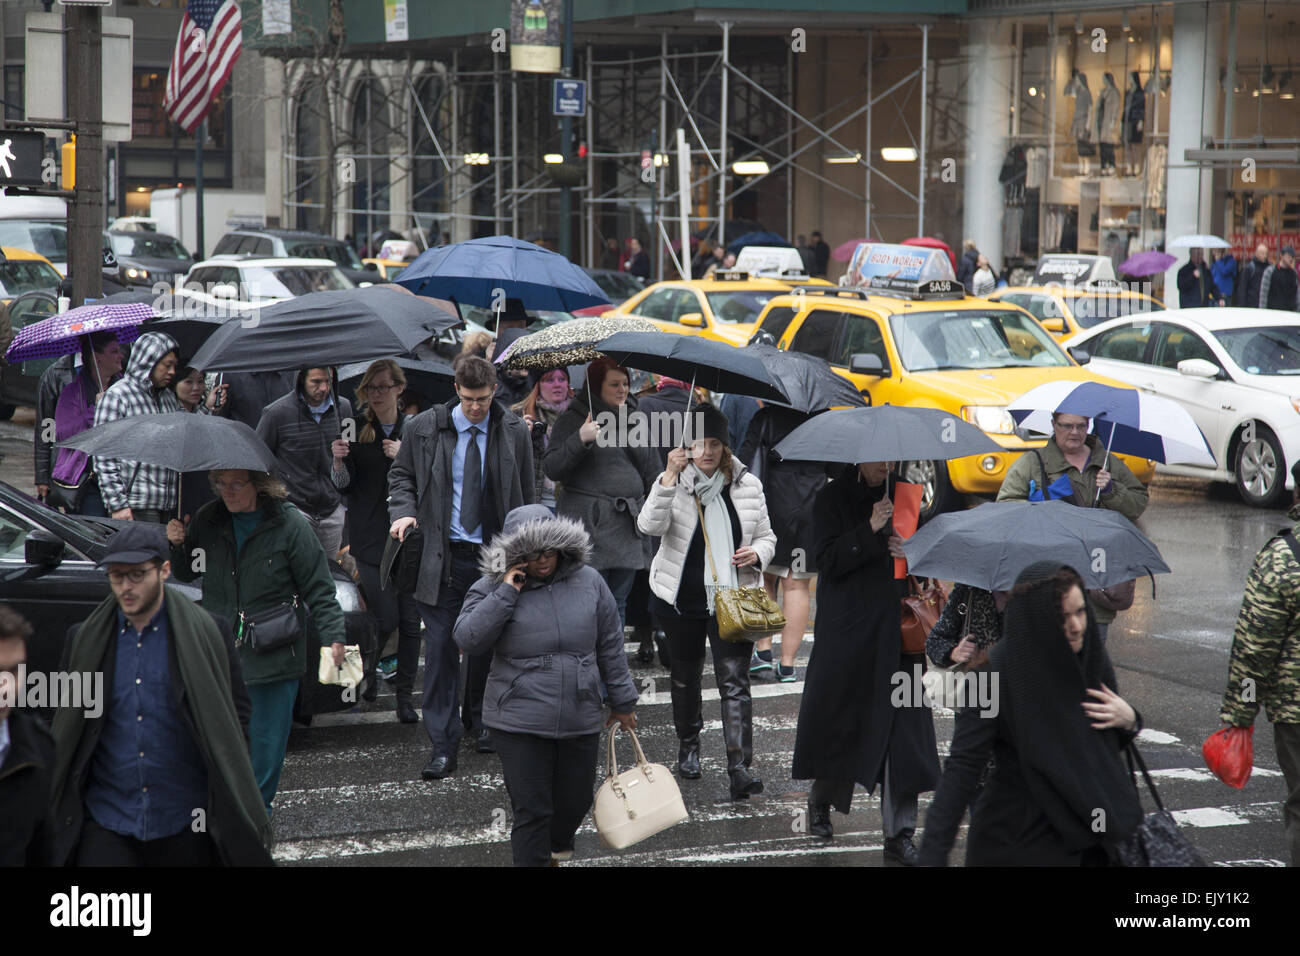 The street remains busy with umbrellas up on a rainy day in midtown Manhattan. Stock Photo